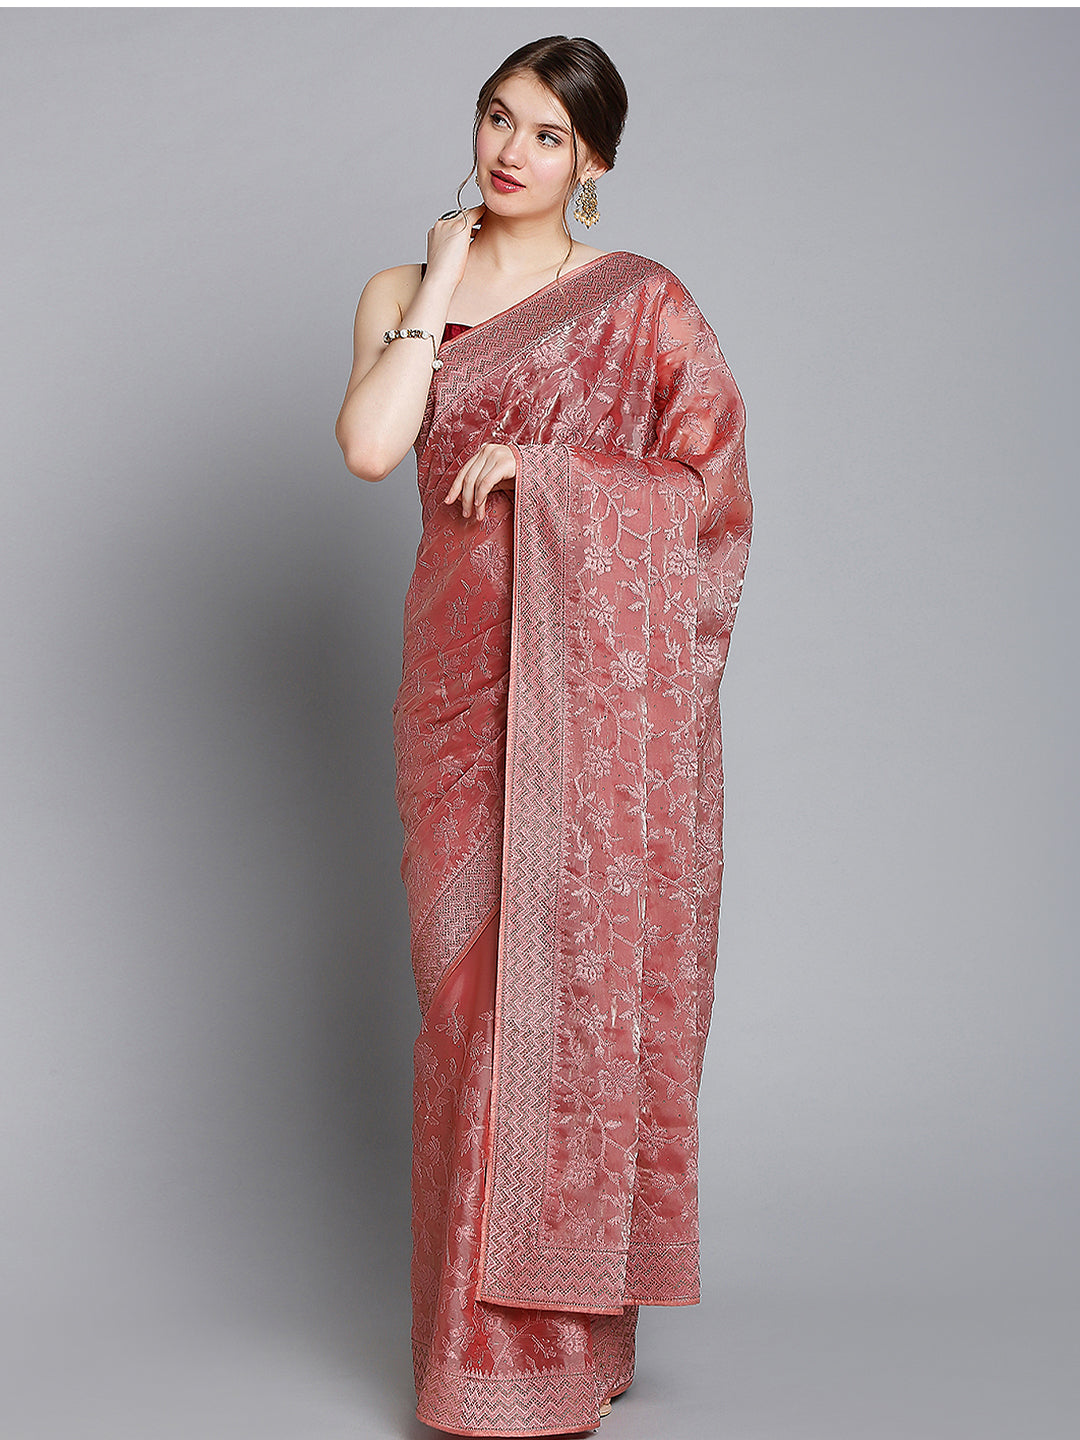 Rose Pink Soft Tissue Saree With Floral Embroidery